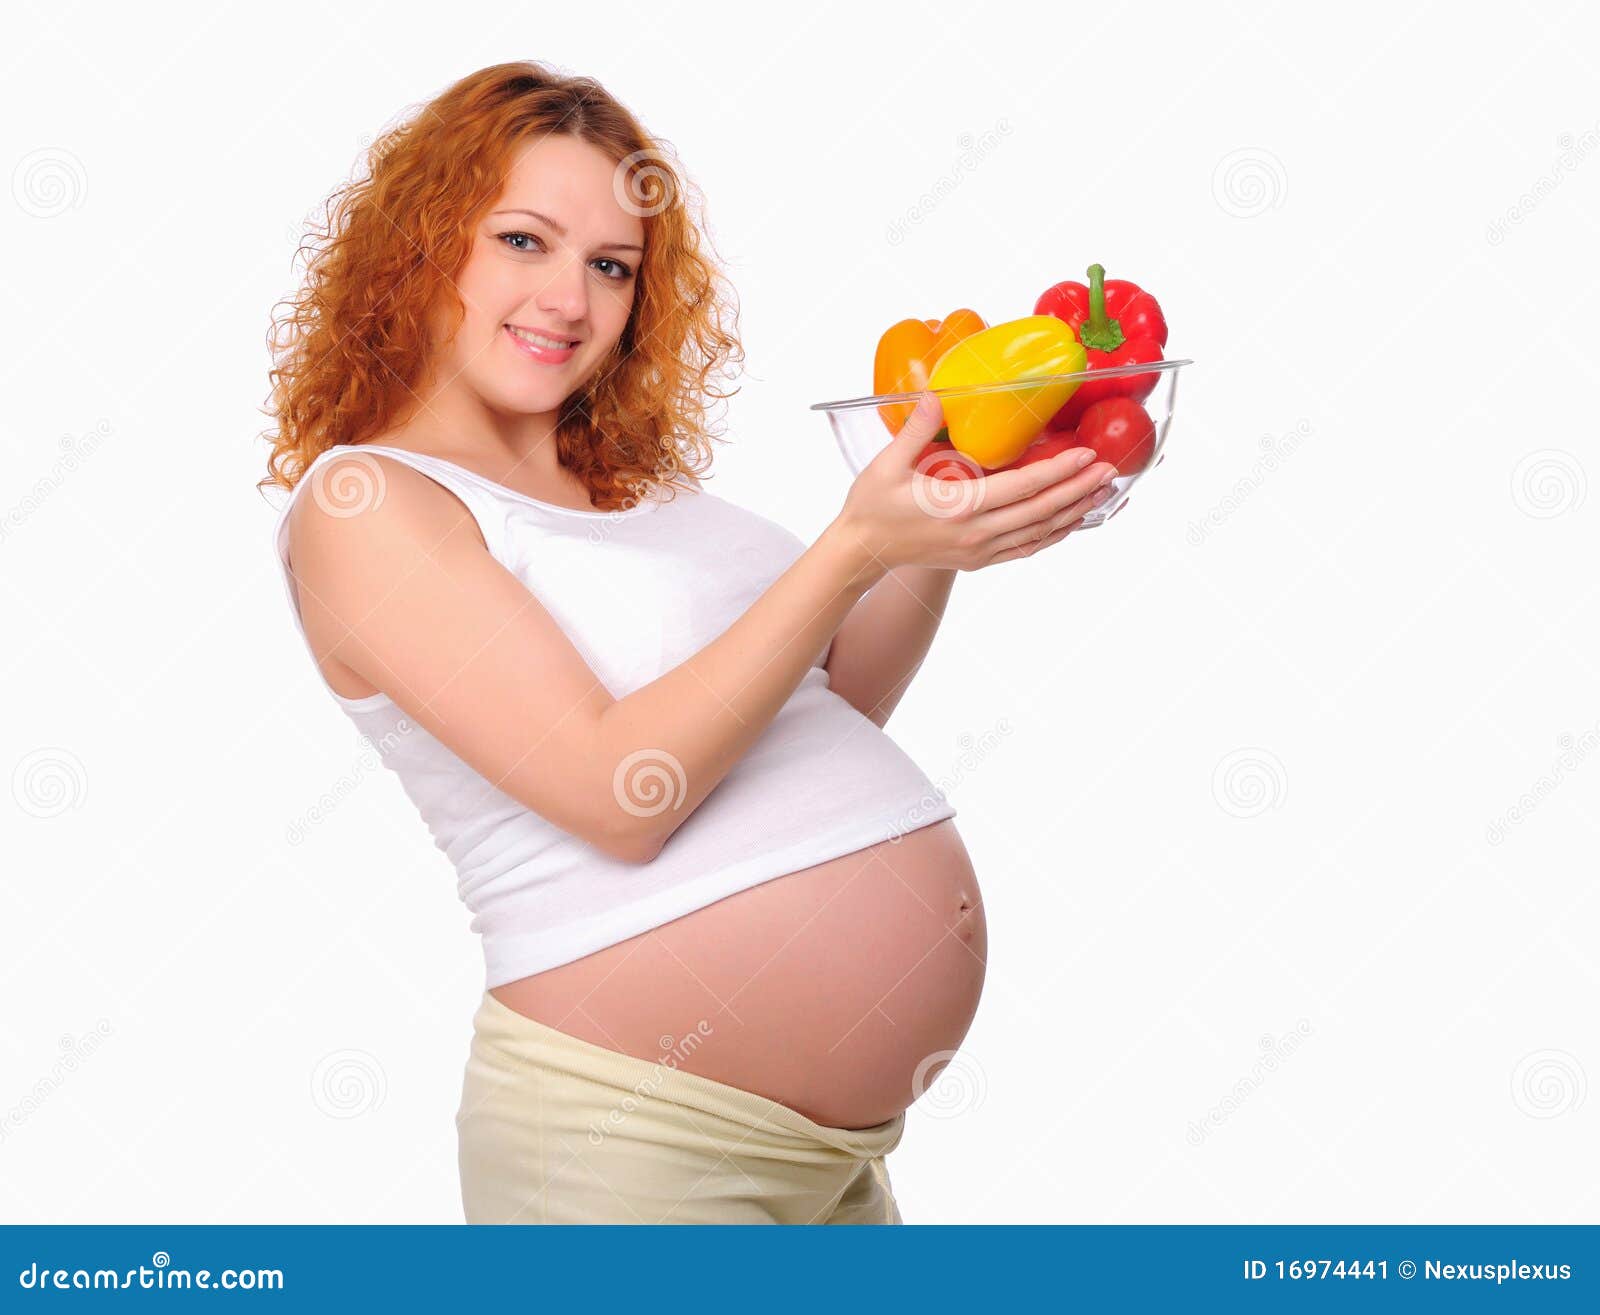 Pregnant Red Heads 27